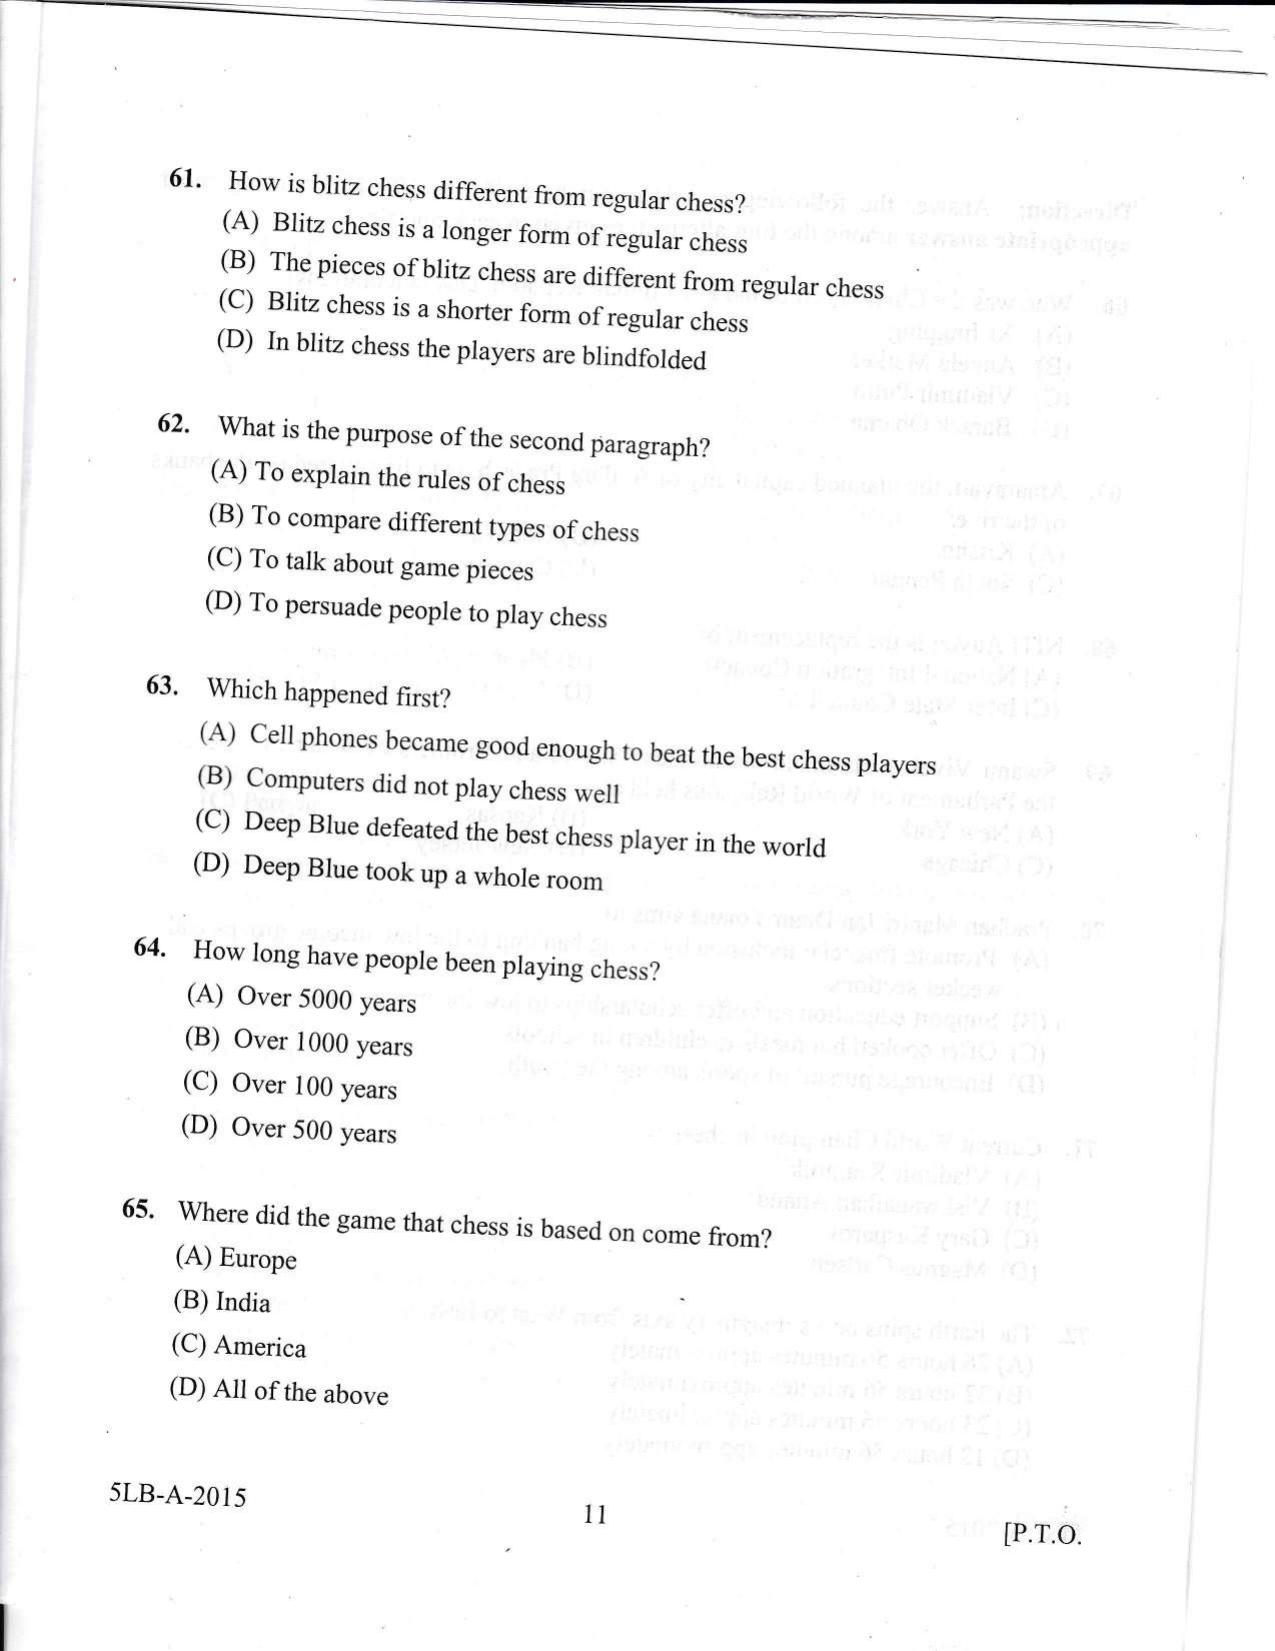 KLEE 5 Year LLB Exam 2015 Question Paper - Page 11